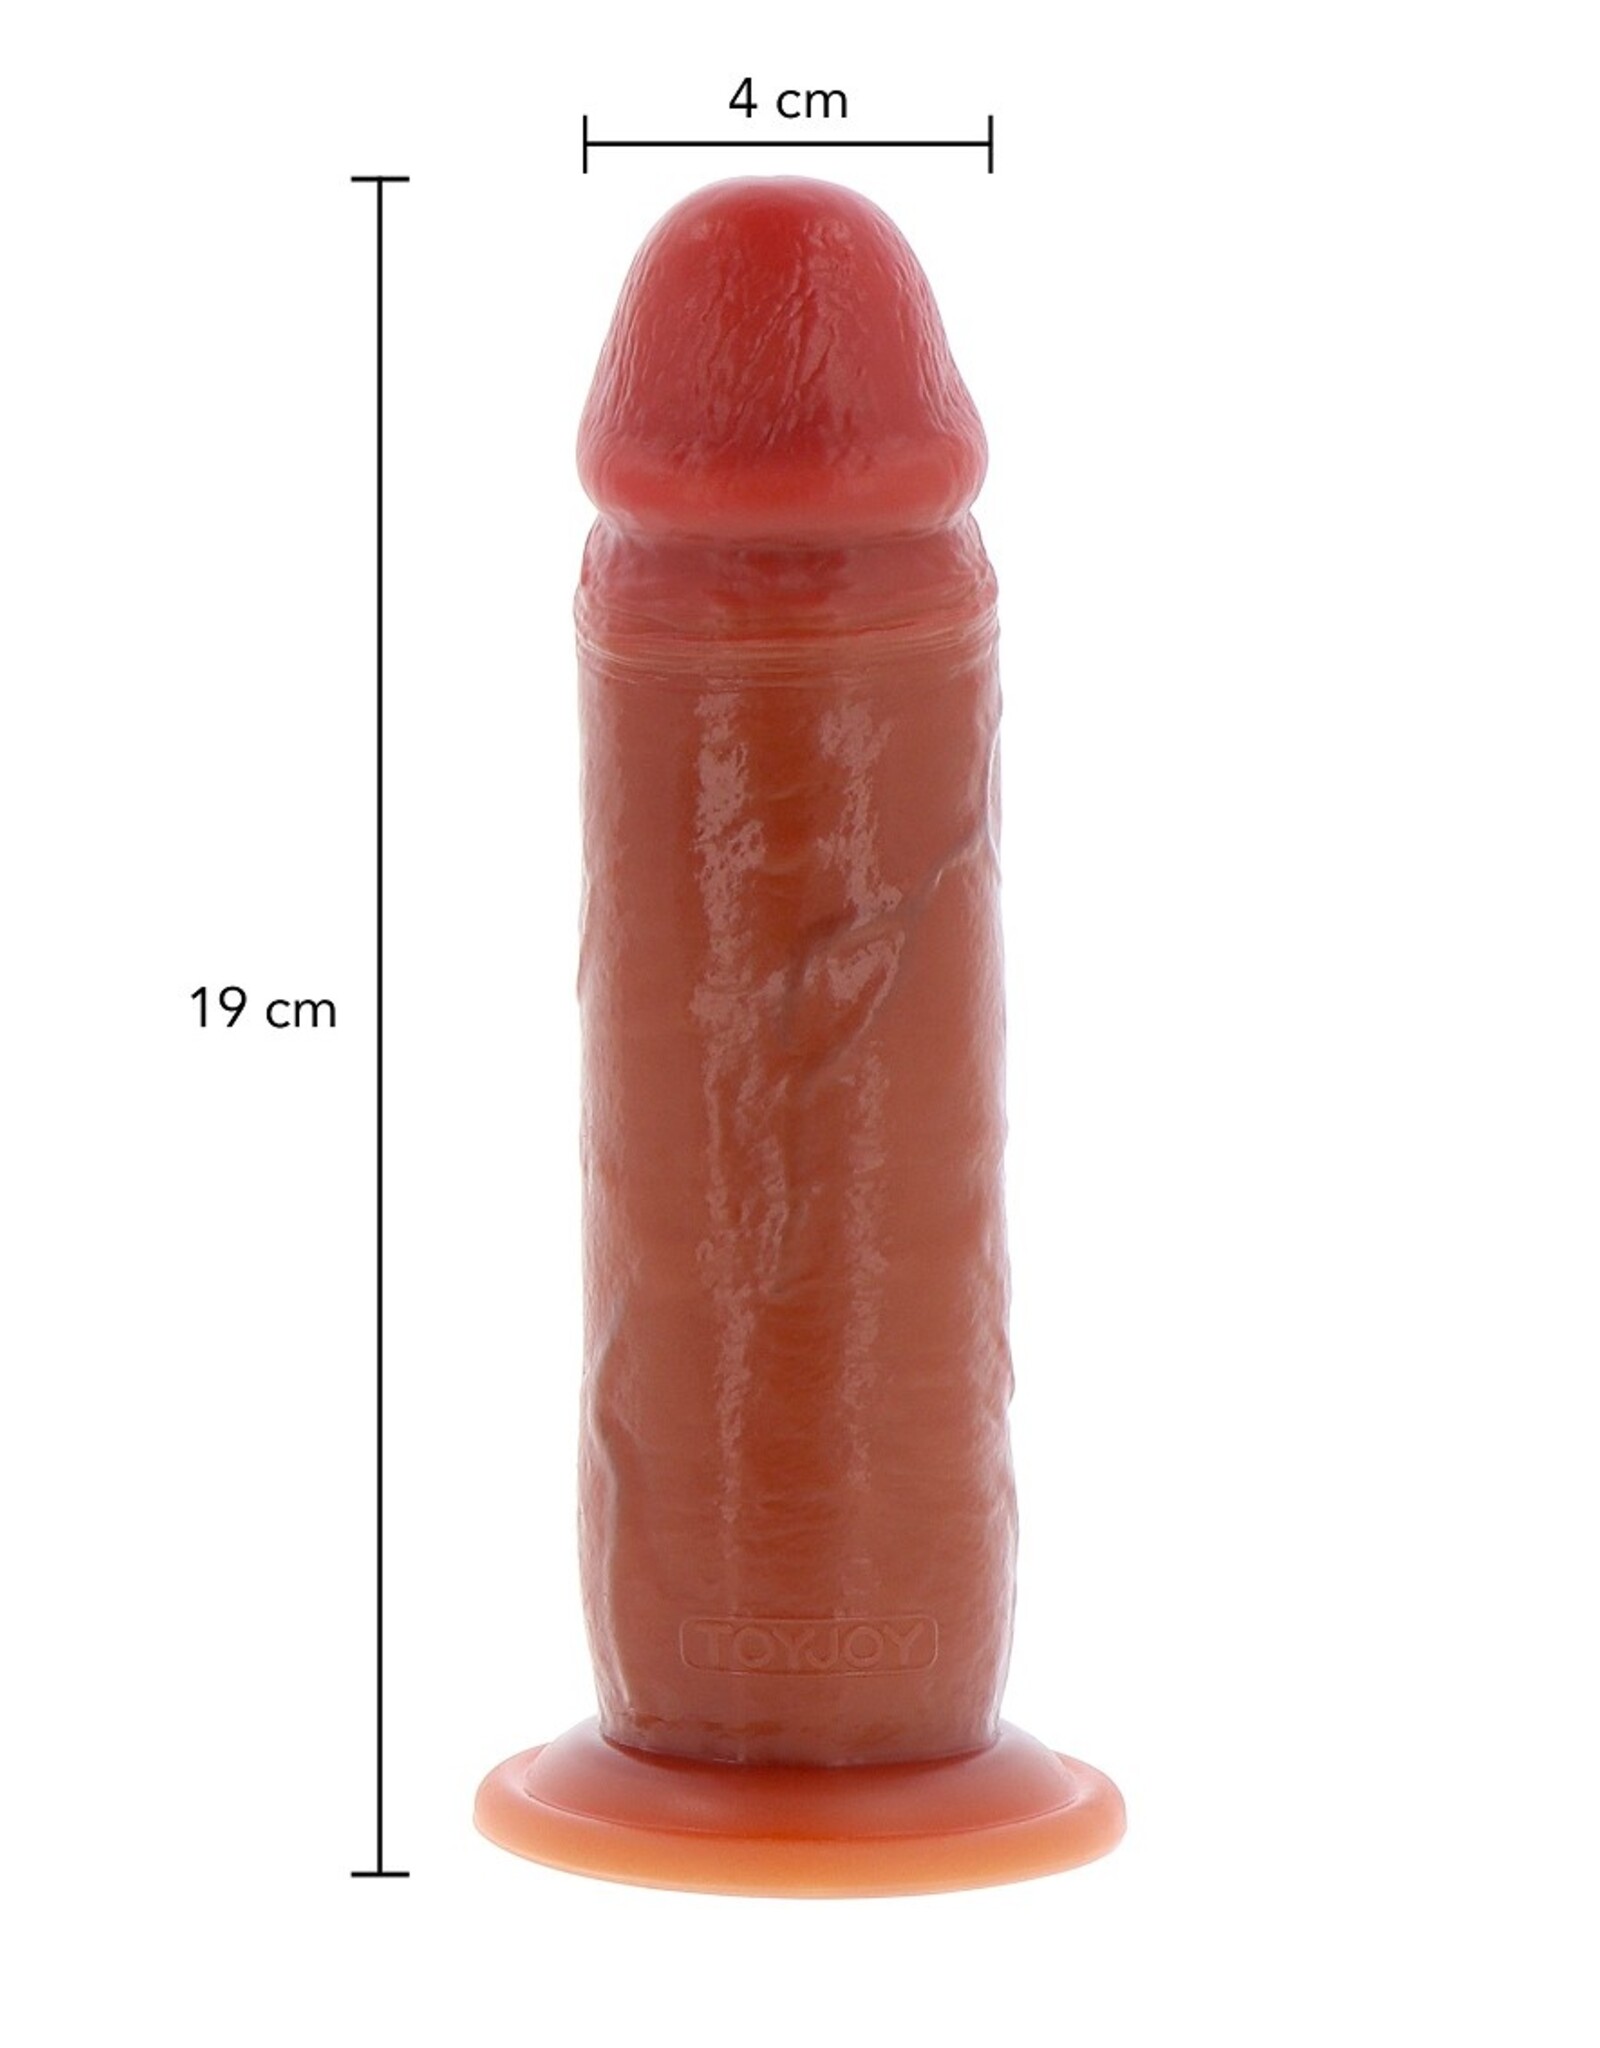 ToyJoy Get Real Silicone Foreskin Dong 19 cm